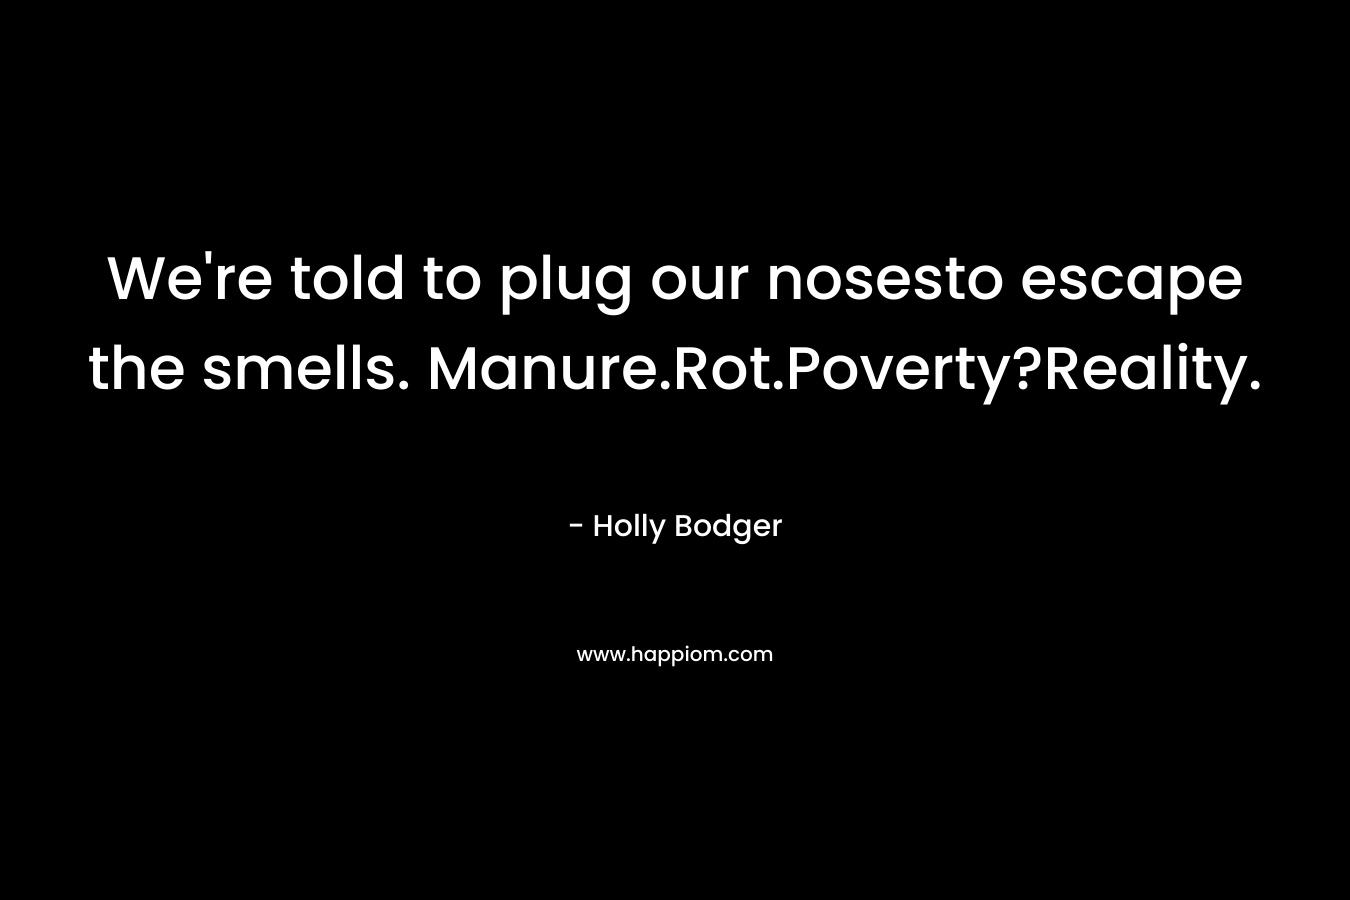 We're told to plug our nosesto escape the smells. Manure.Rot.Poverty?Reality.